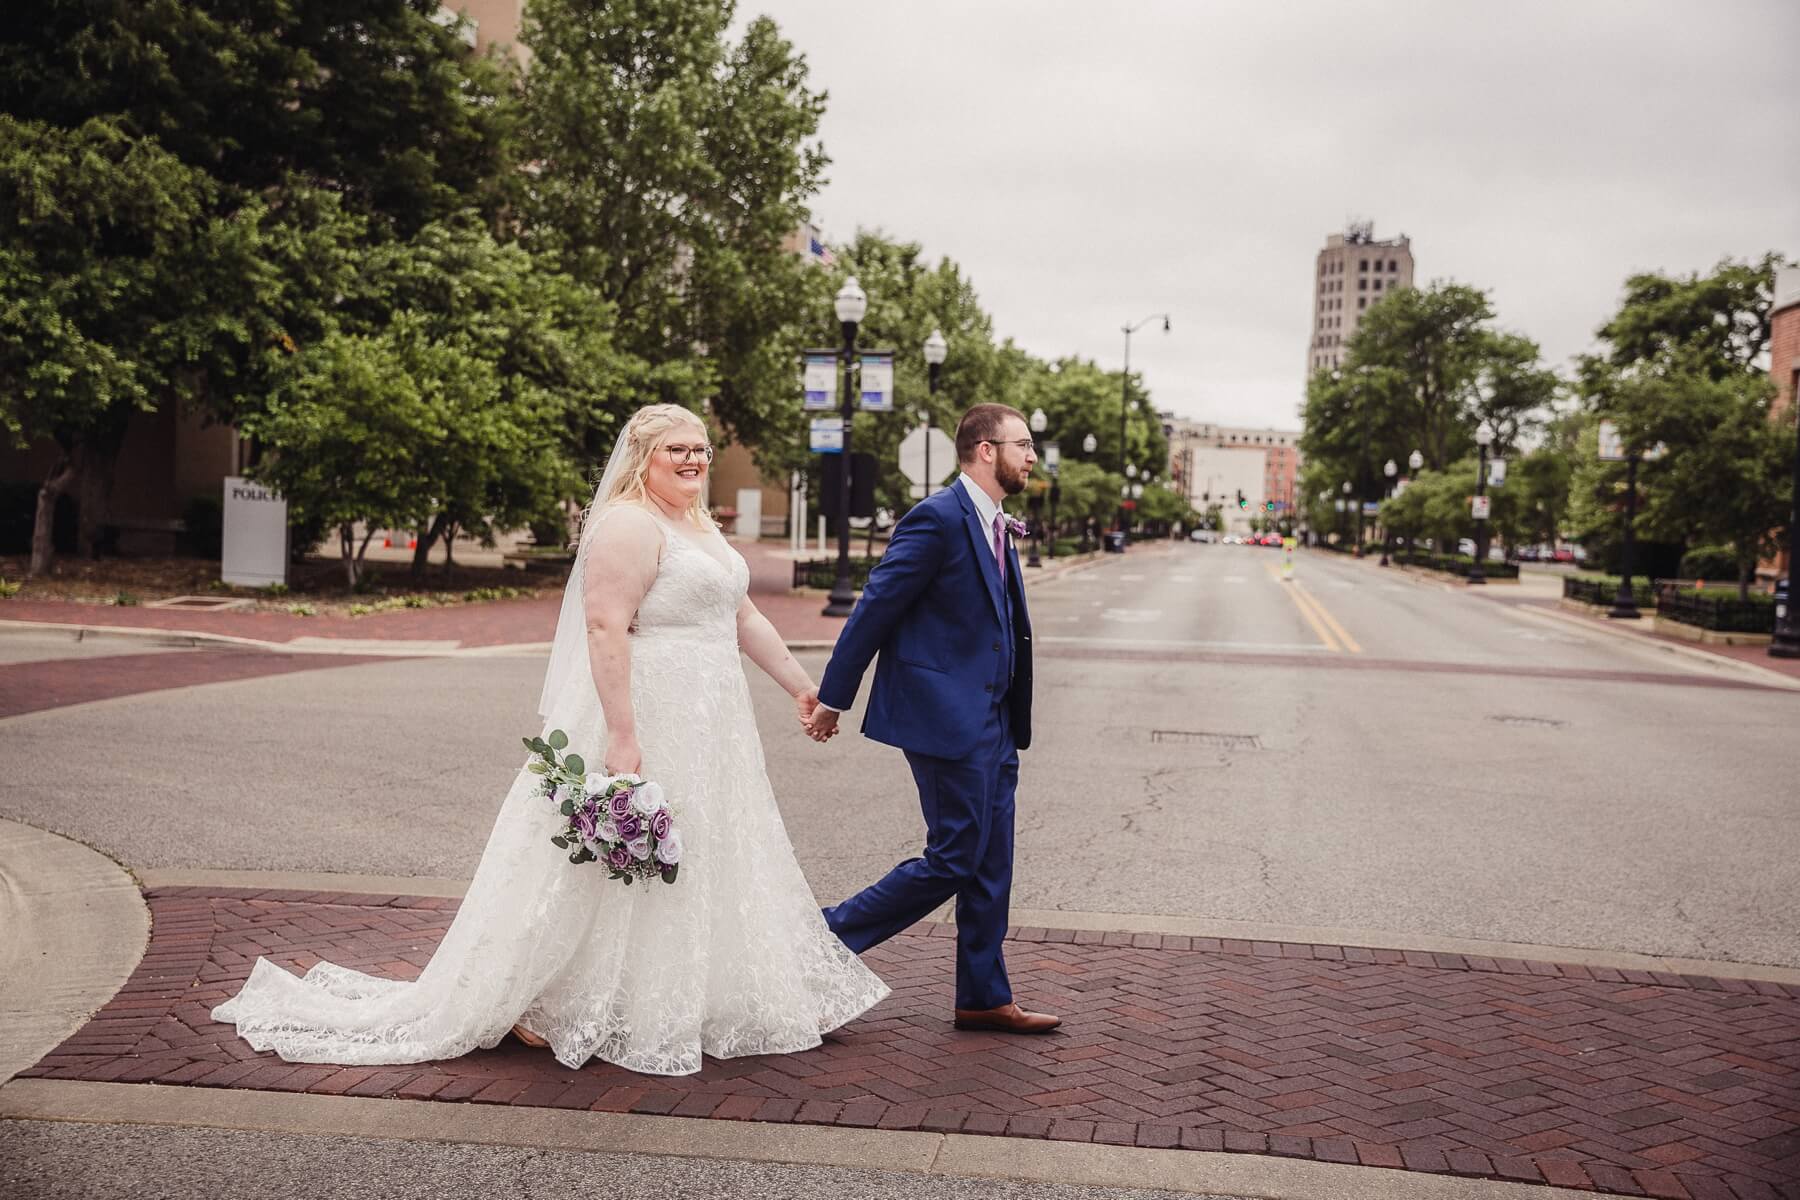 Bride and groom holding hands and walking in the street